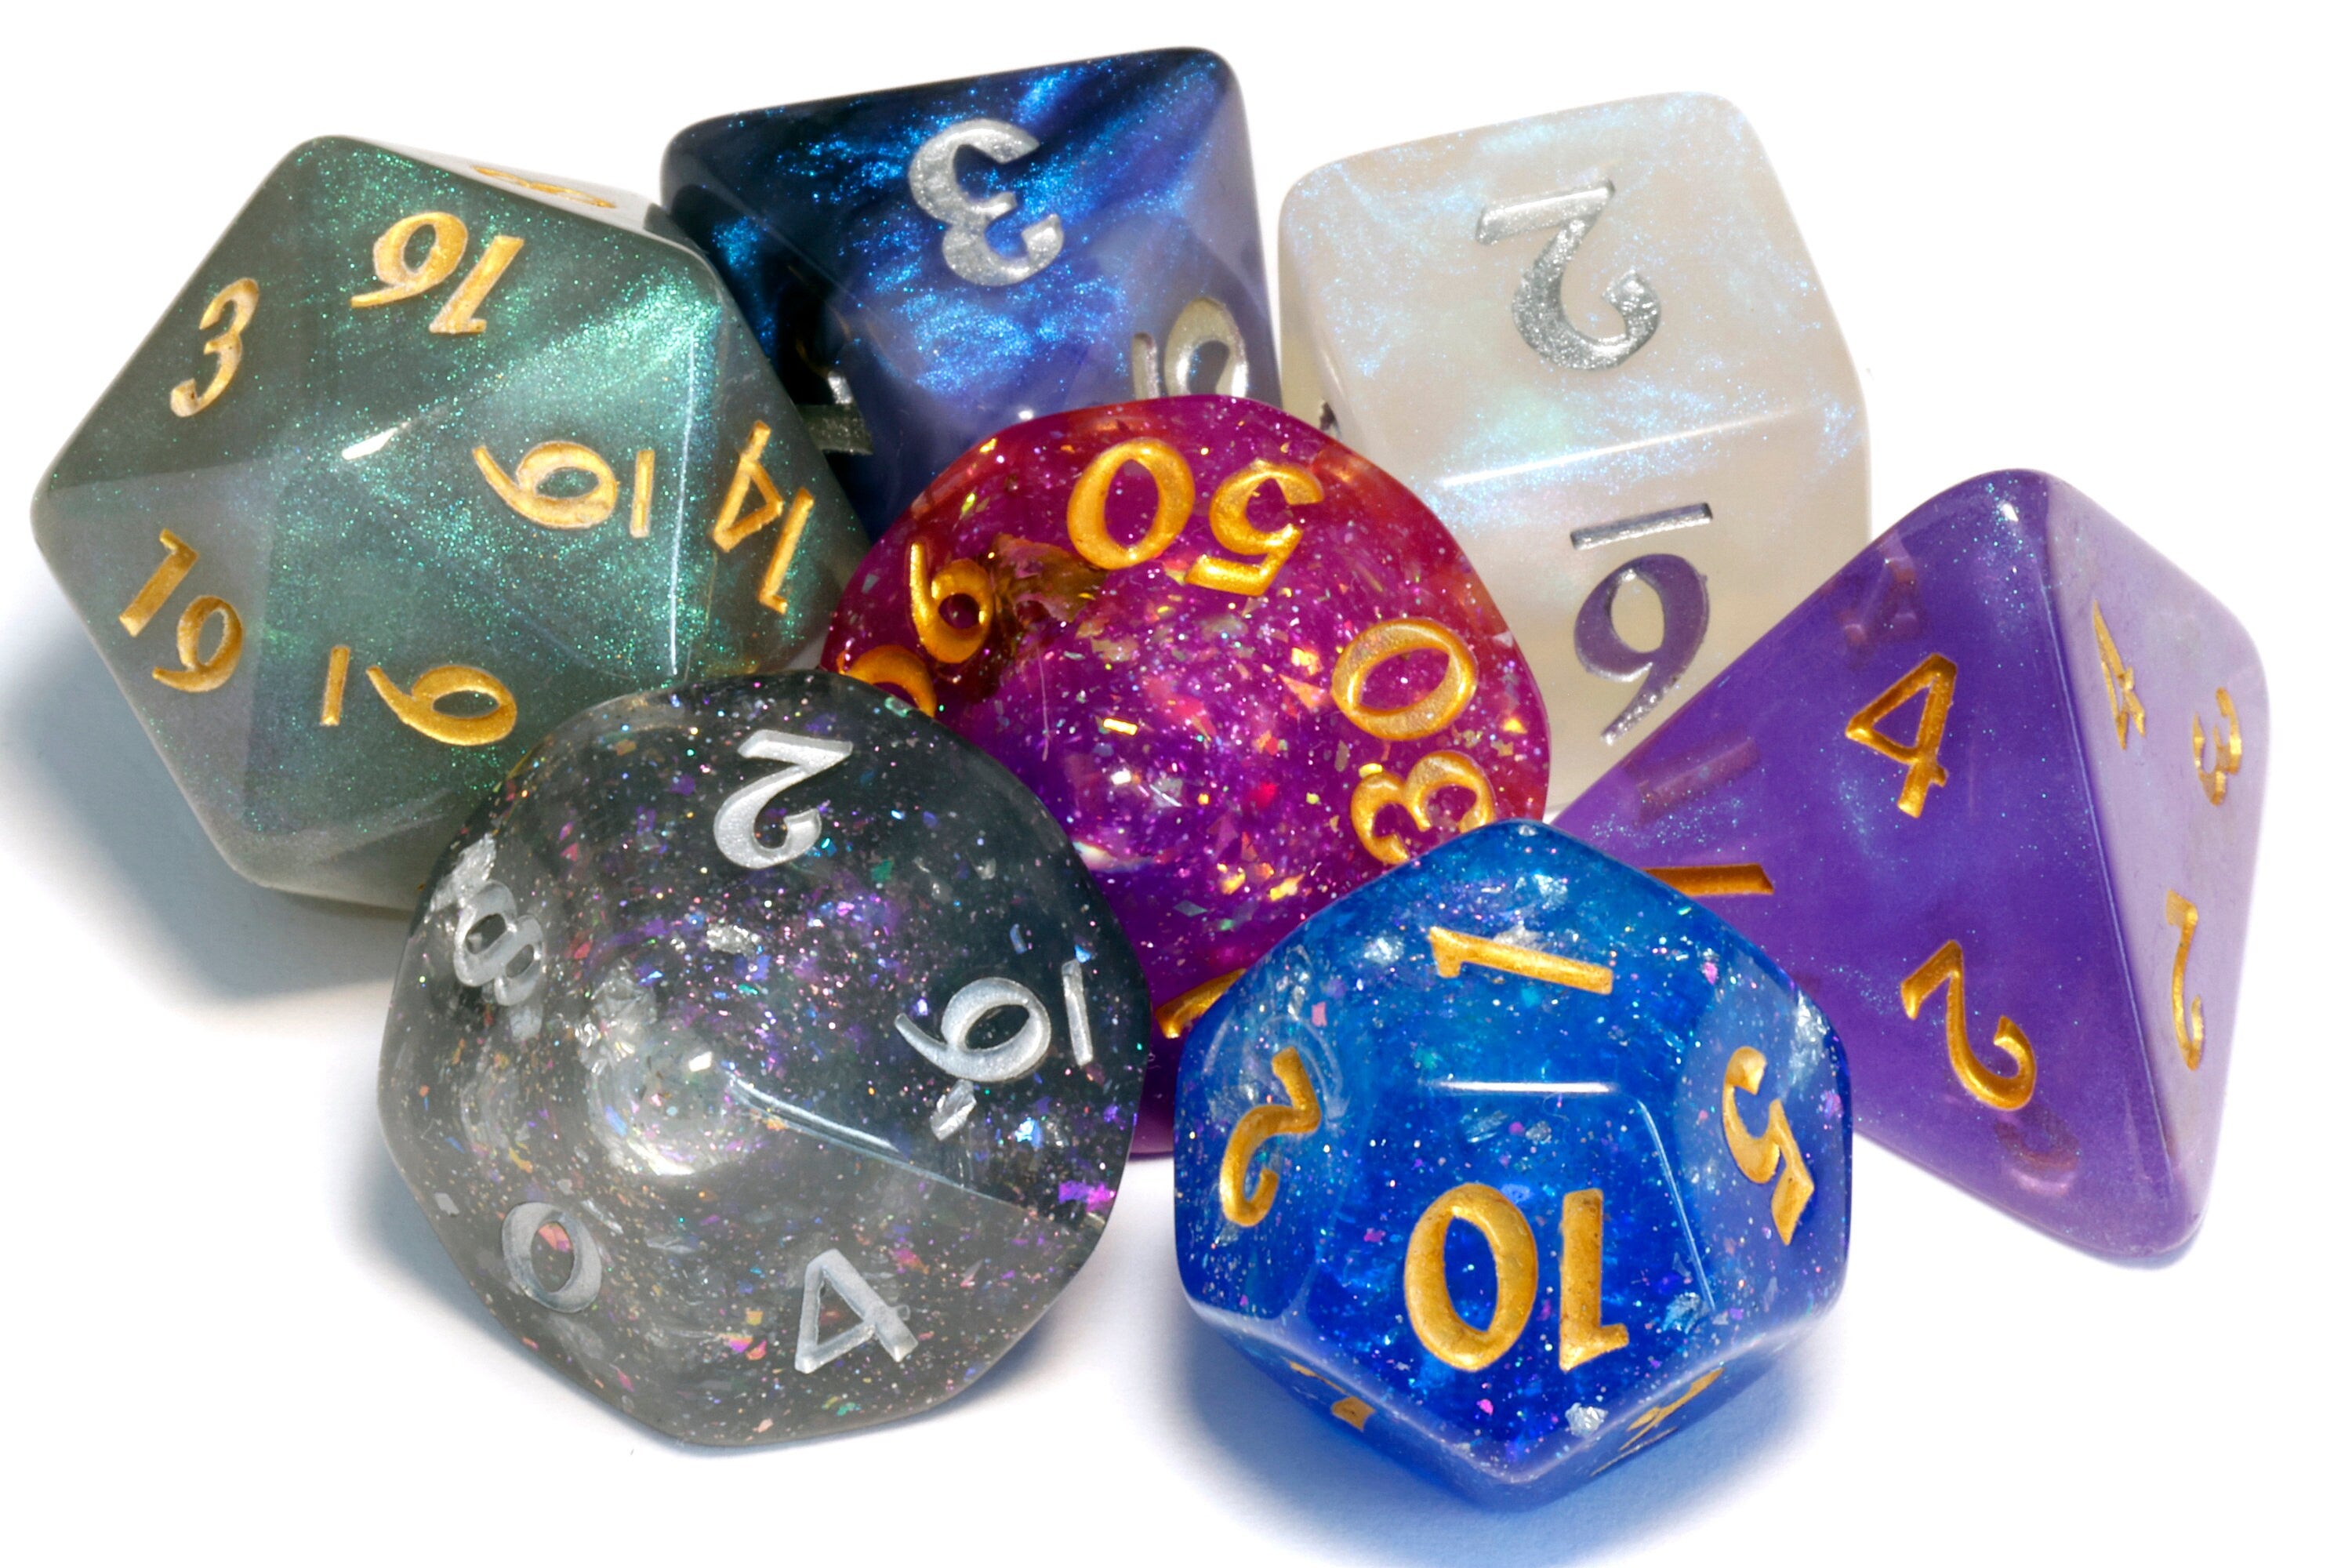 Chaos dice box and set - Mixed dice set with glitters